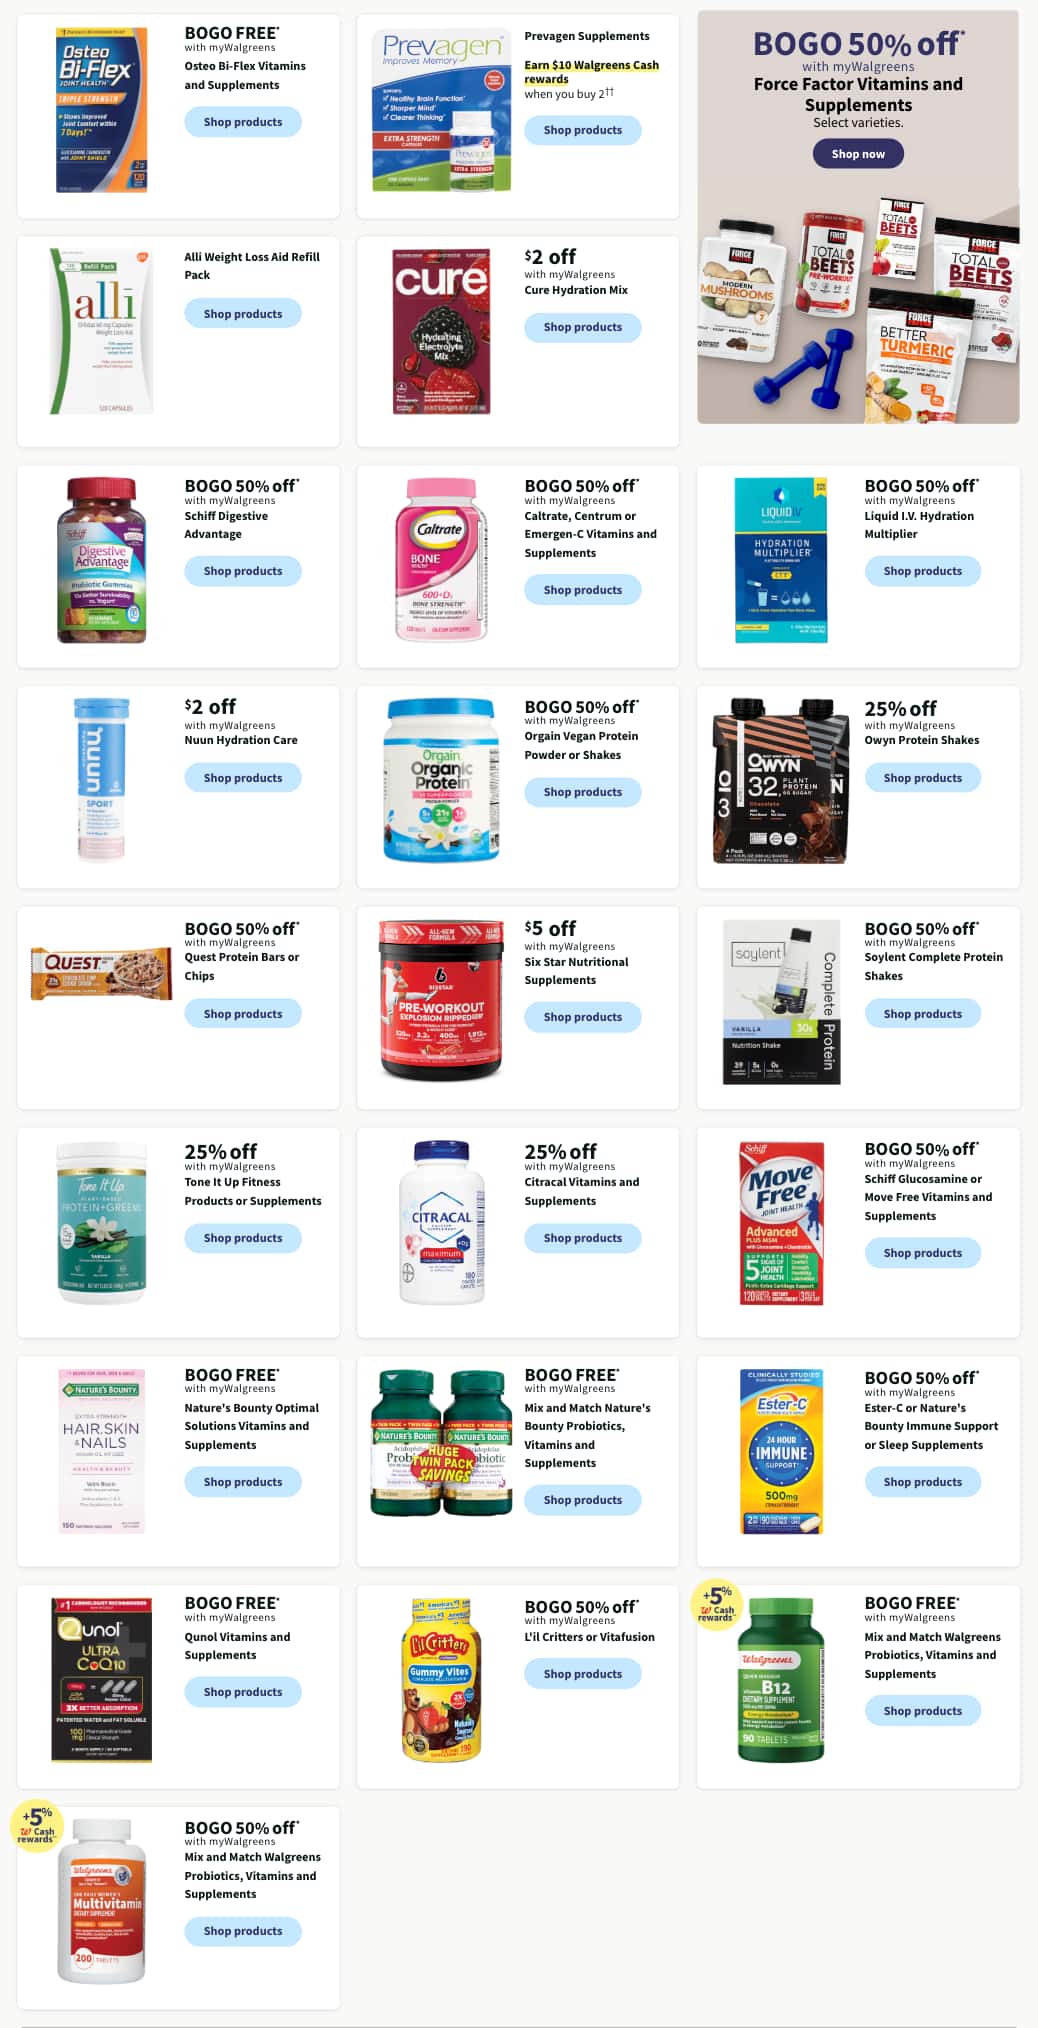 Walgreens Weekly Ad Preview for May 5 - 11, 2024